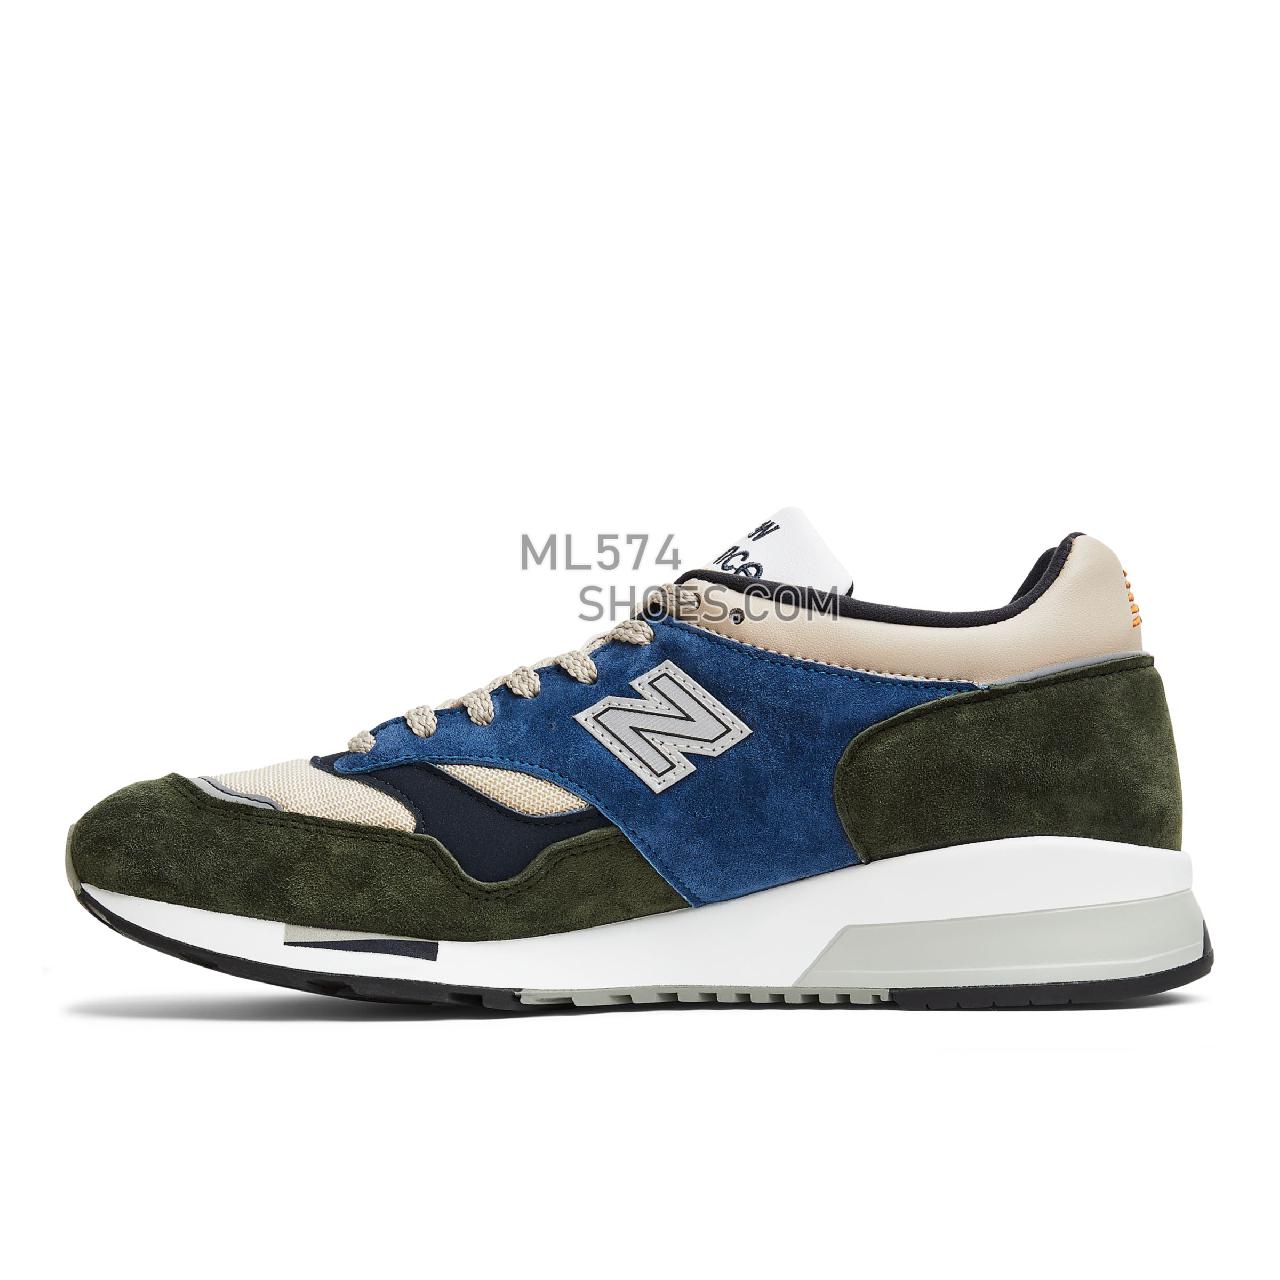 New Balance Made in UK 1500 - Men's Made in USA And UK Sneakers - Khaki with sand and blue - M1500UPG